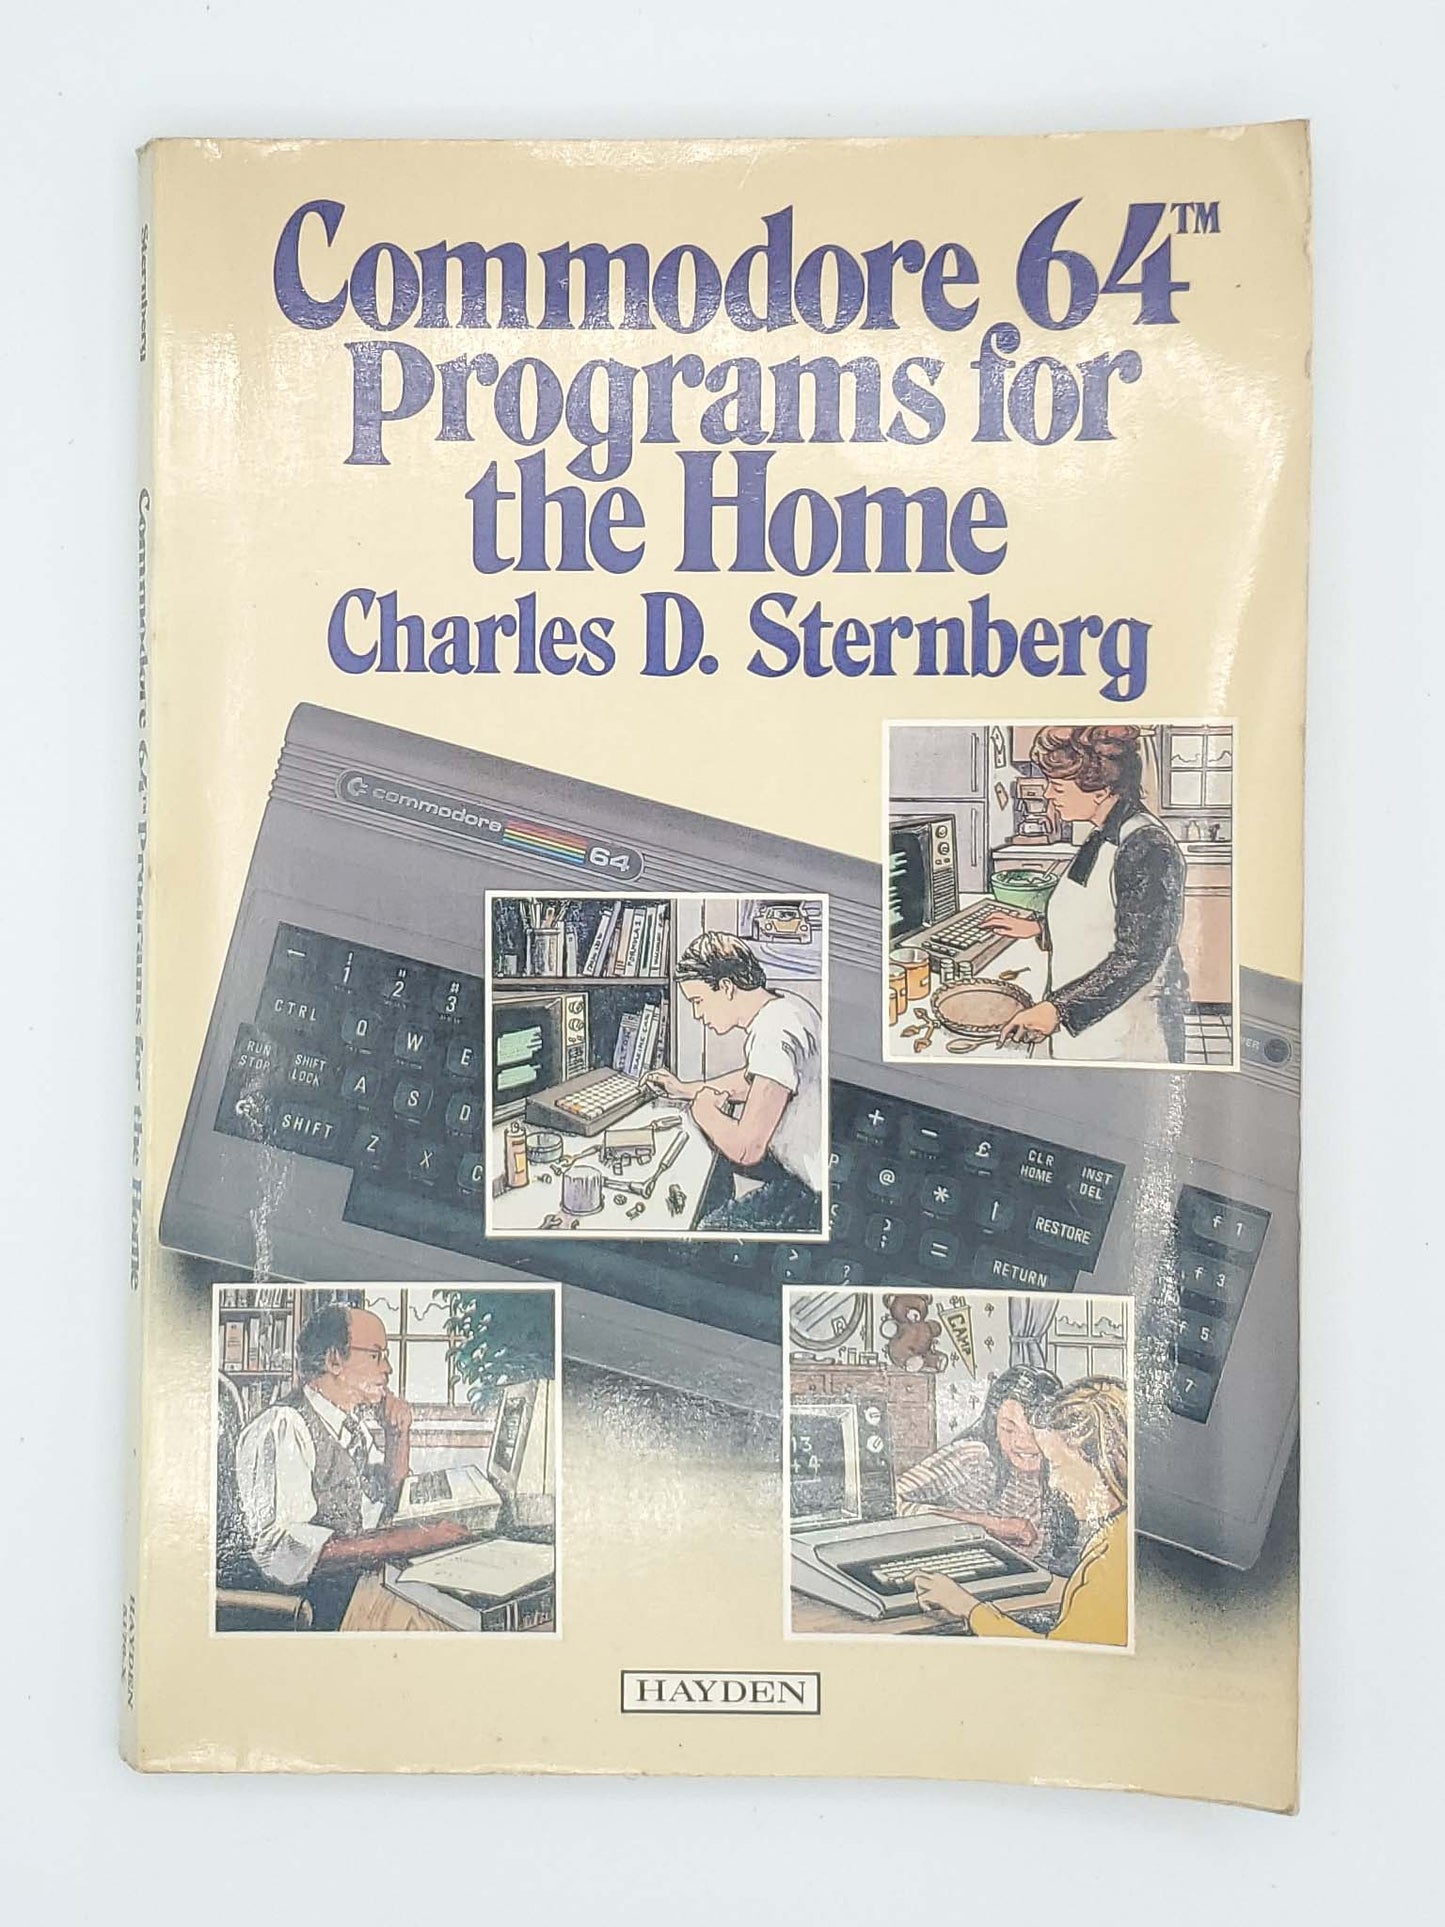 Commodore 64 BASIC Programs for the Home